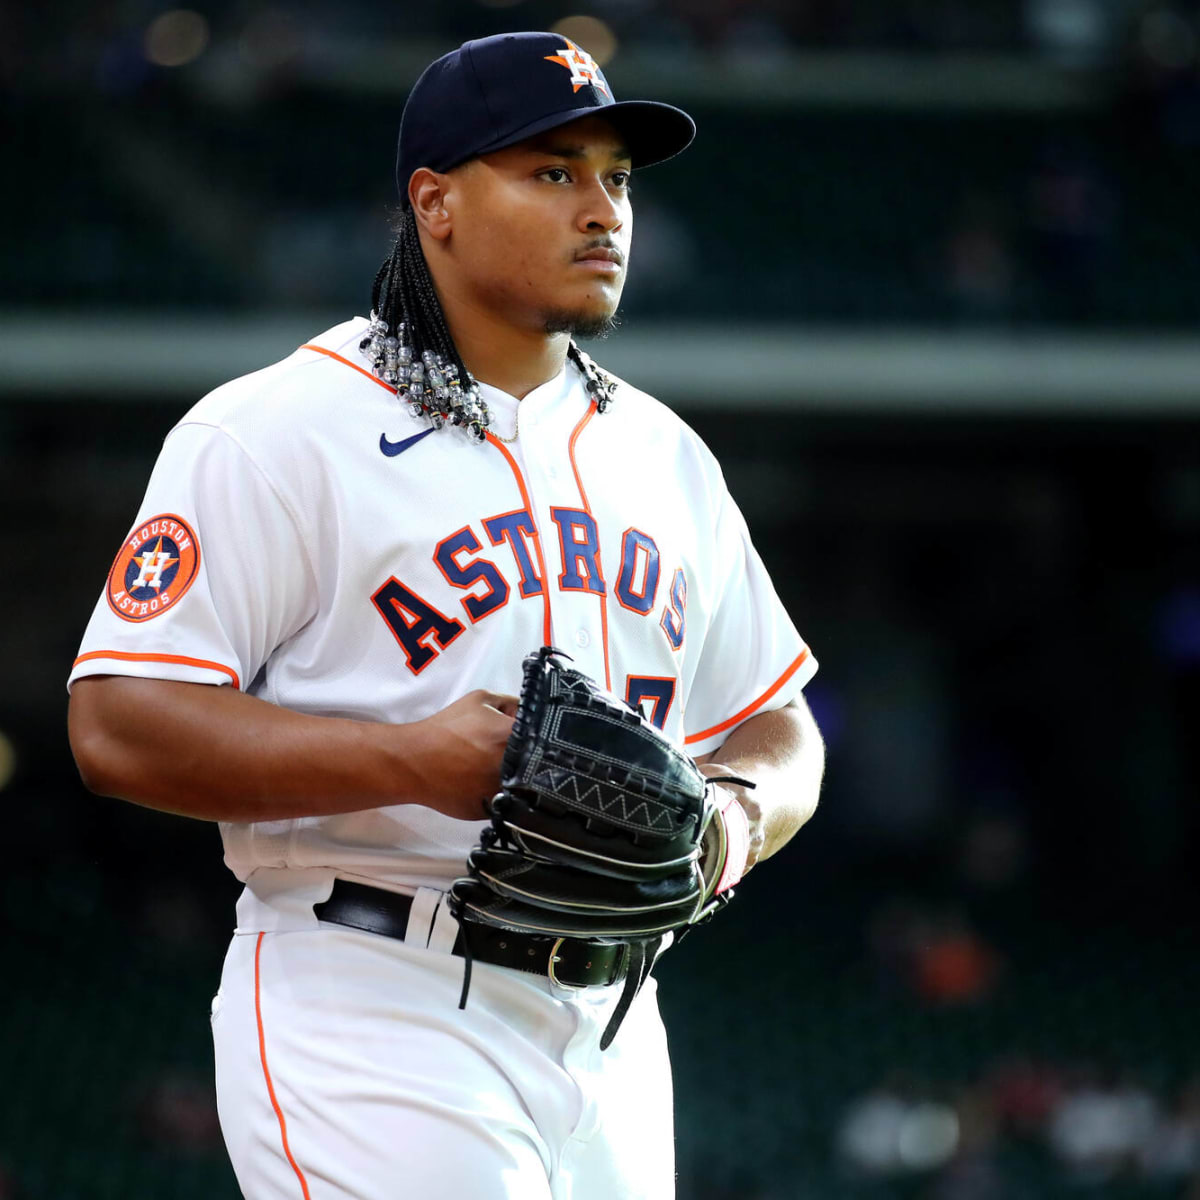 Astros' Garcia leaves in 1st inning with elbow discomfort